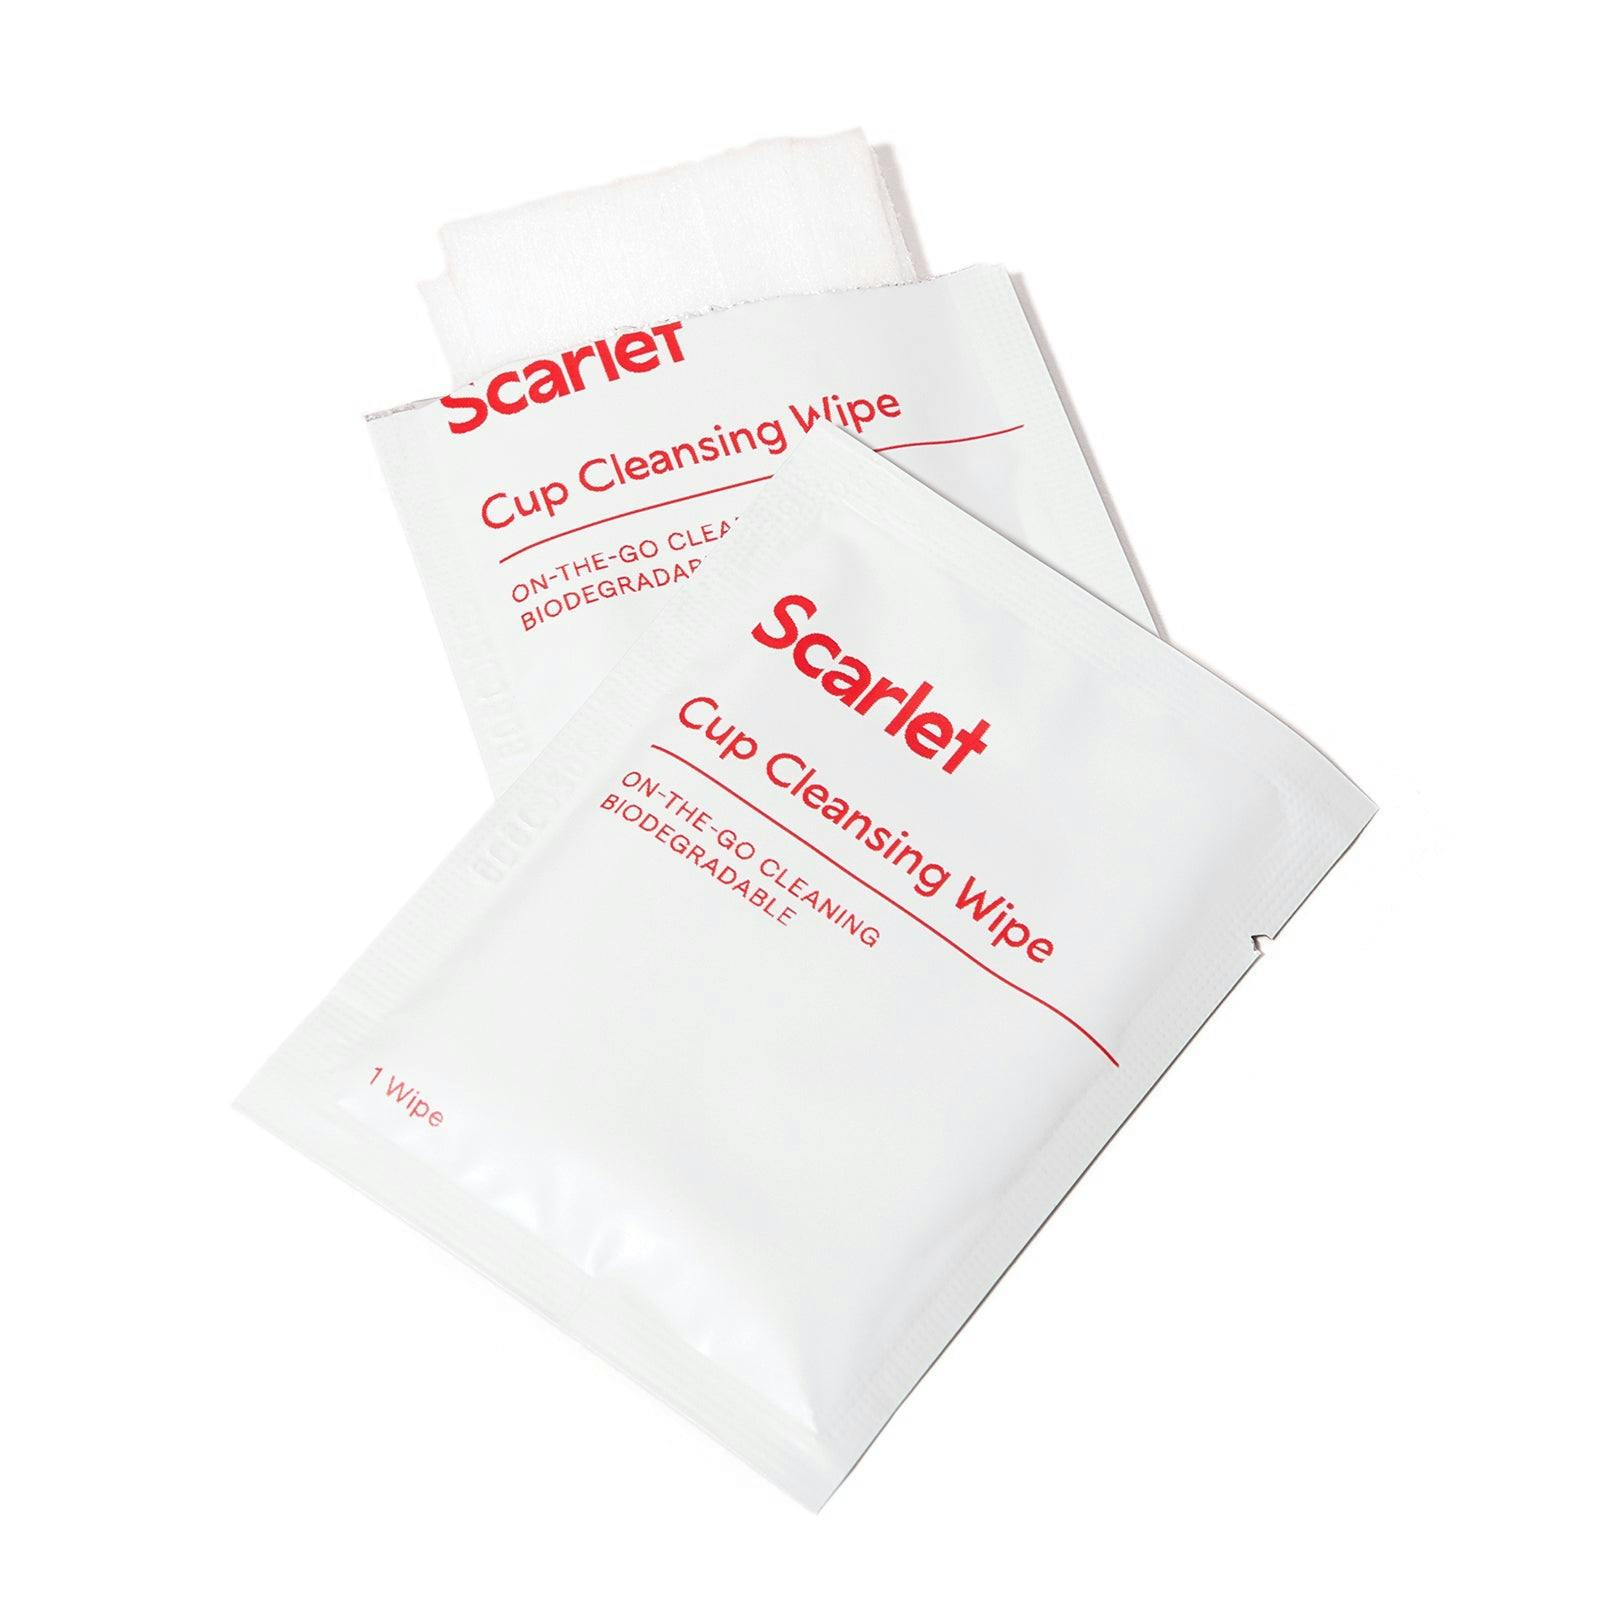 Scarlet On-The-Go Cup Cleansing Wipes - 10 pack